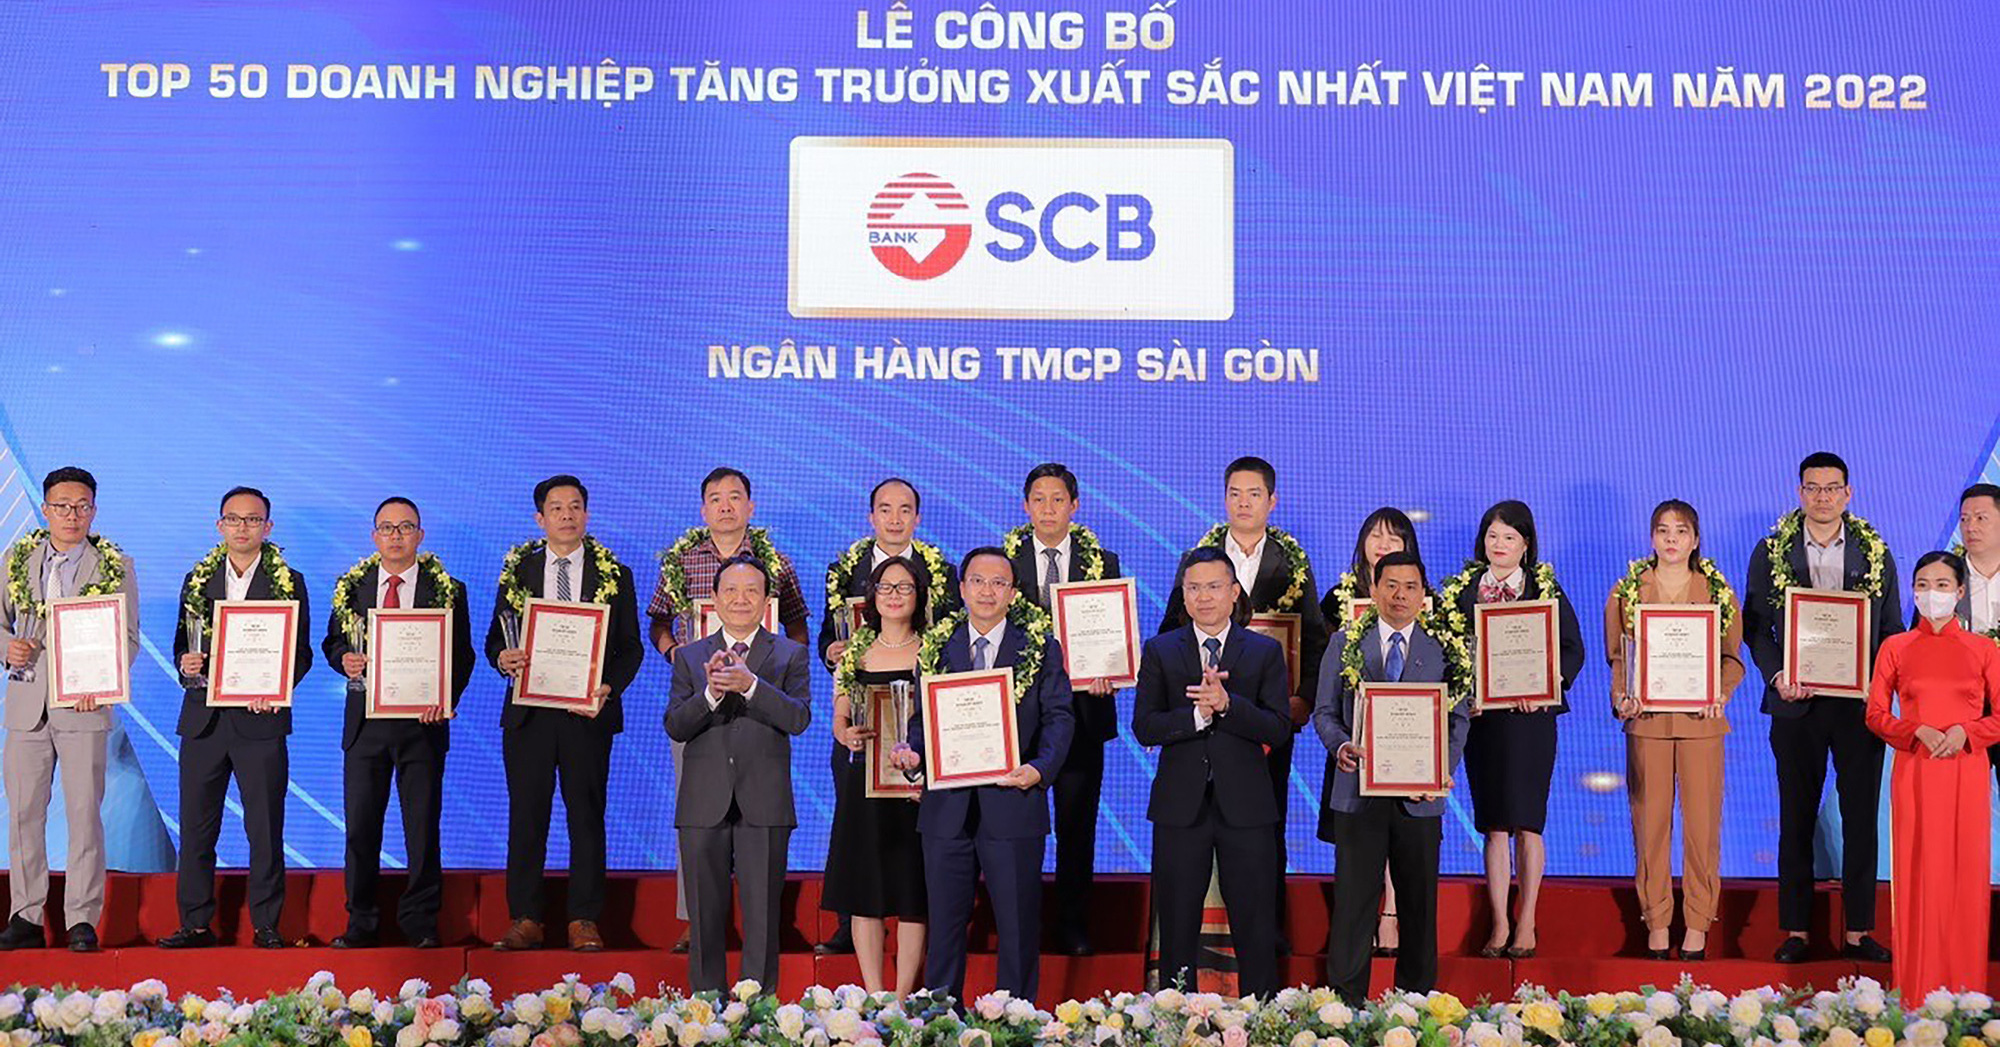 SCB was honored in the top 50 best growth enterprises in Vietnam